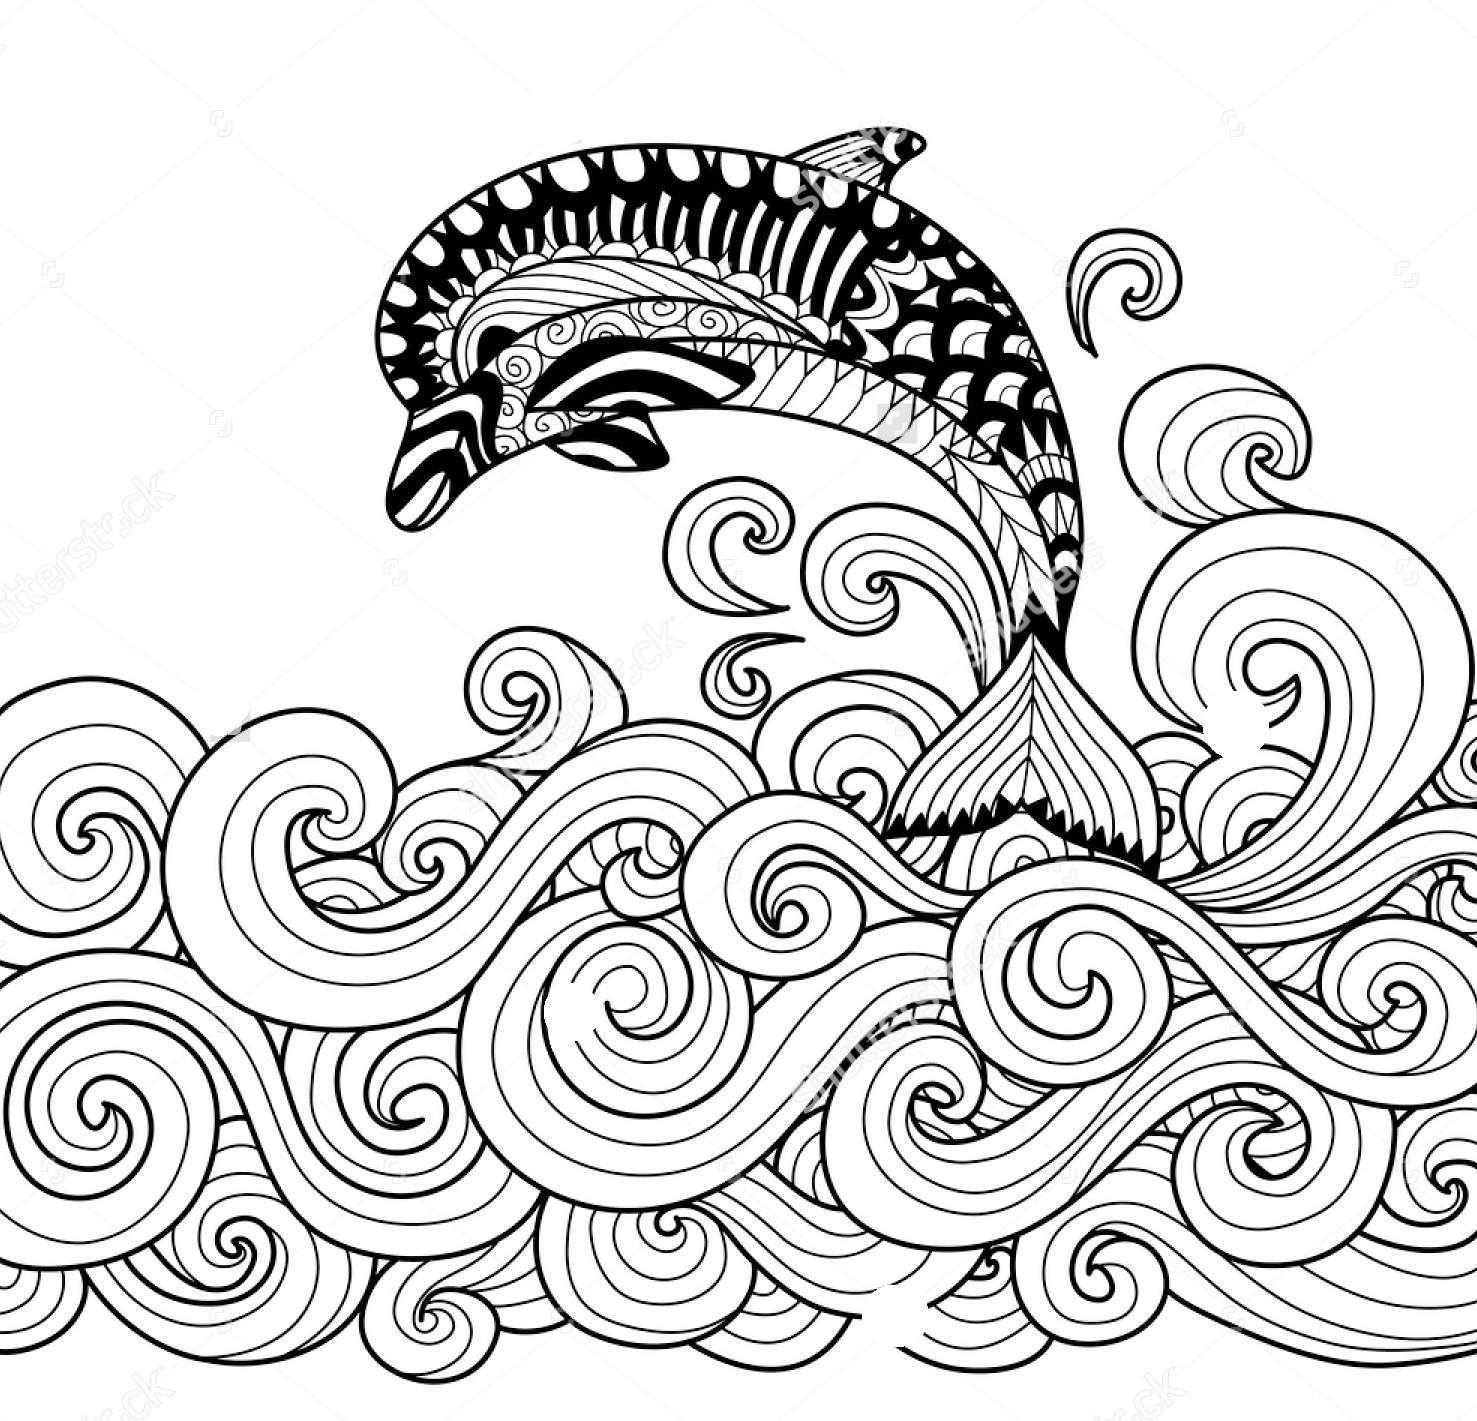 zentangle-dolphin-vector-coloring-page